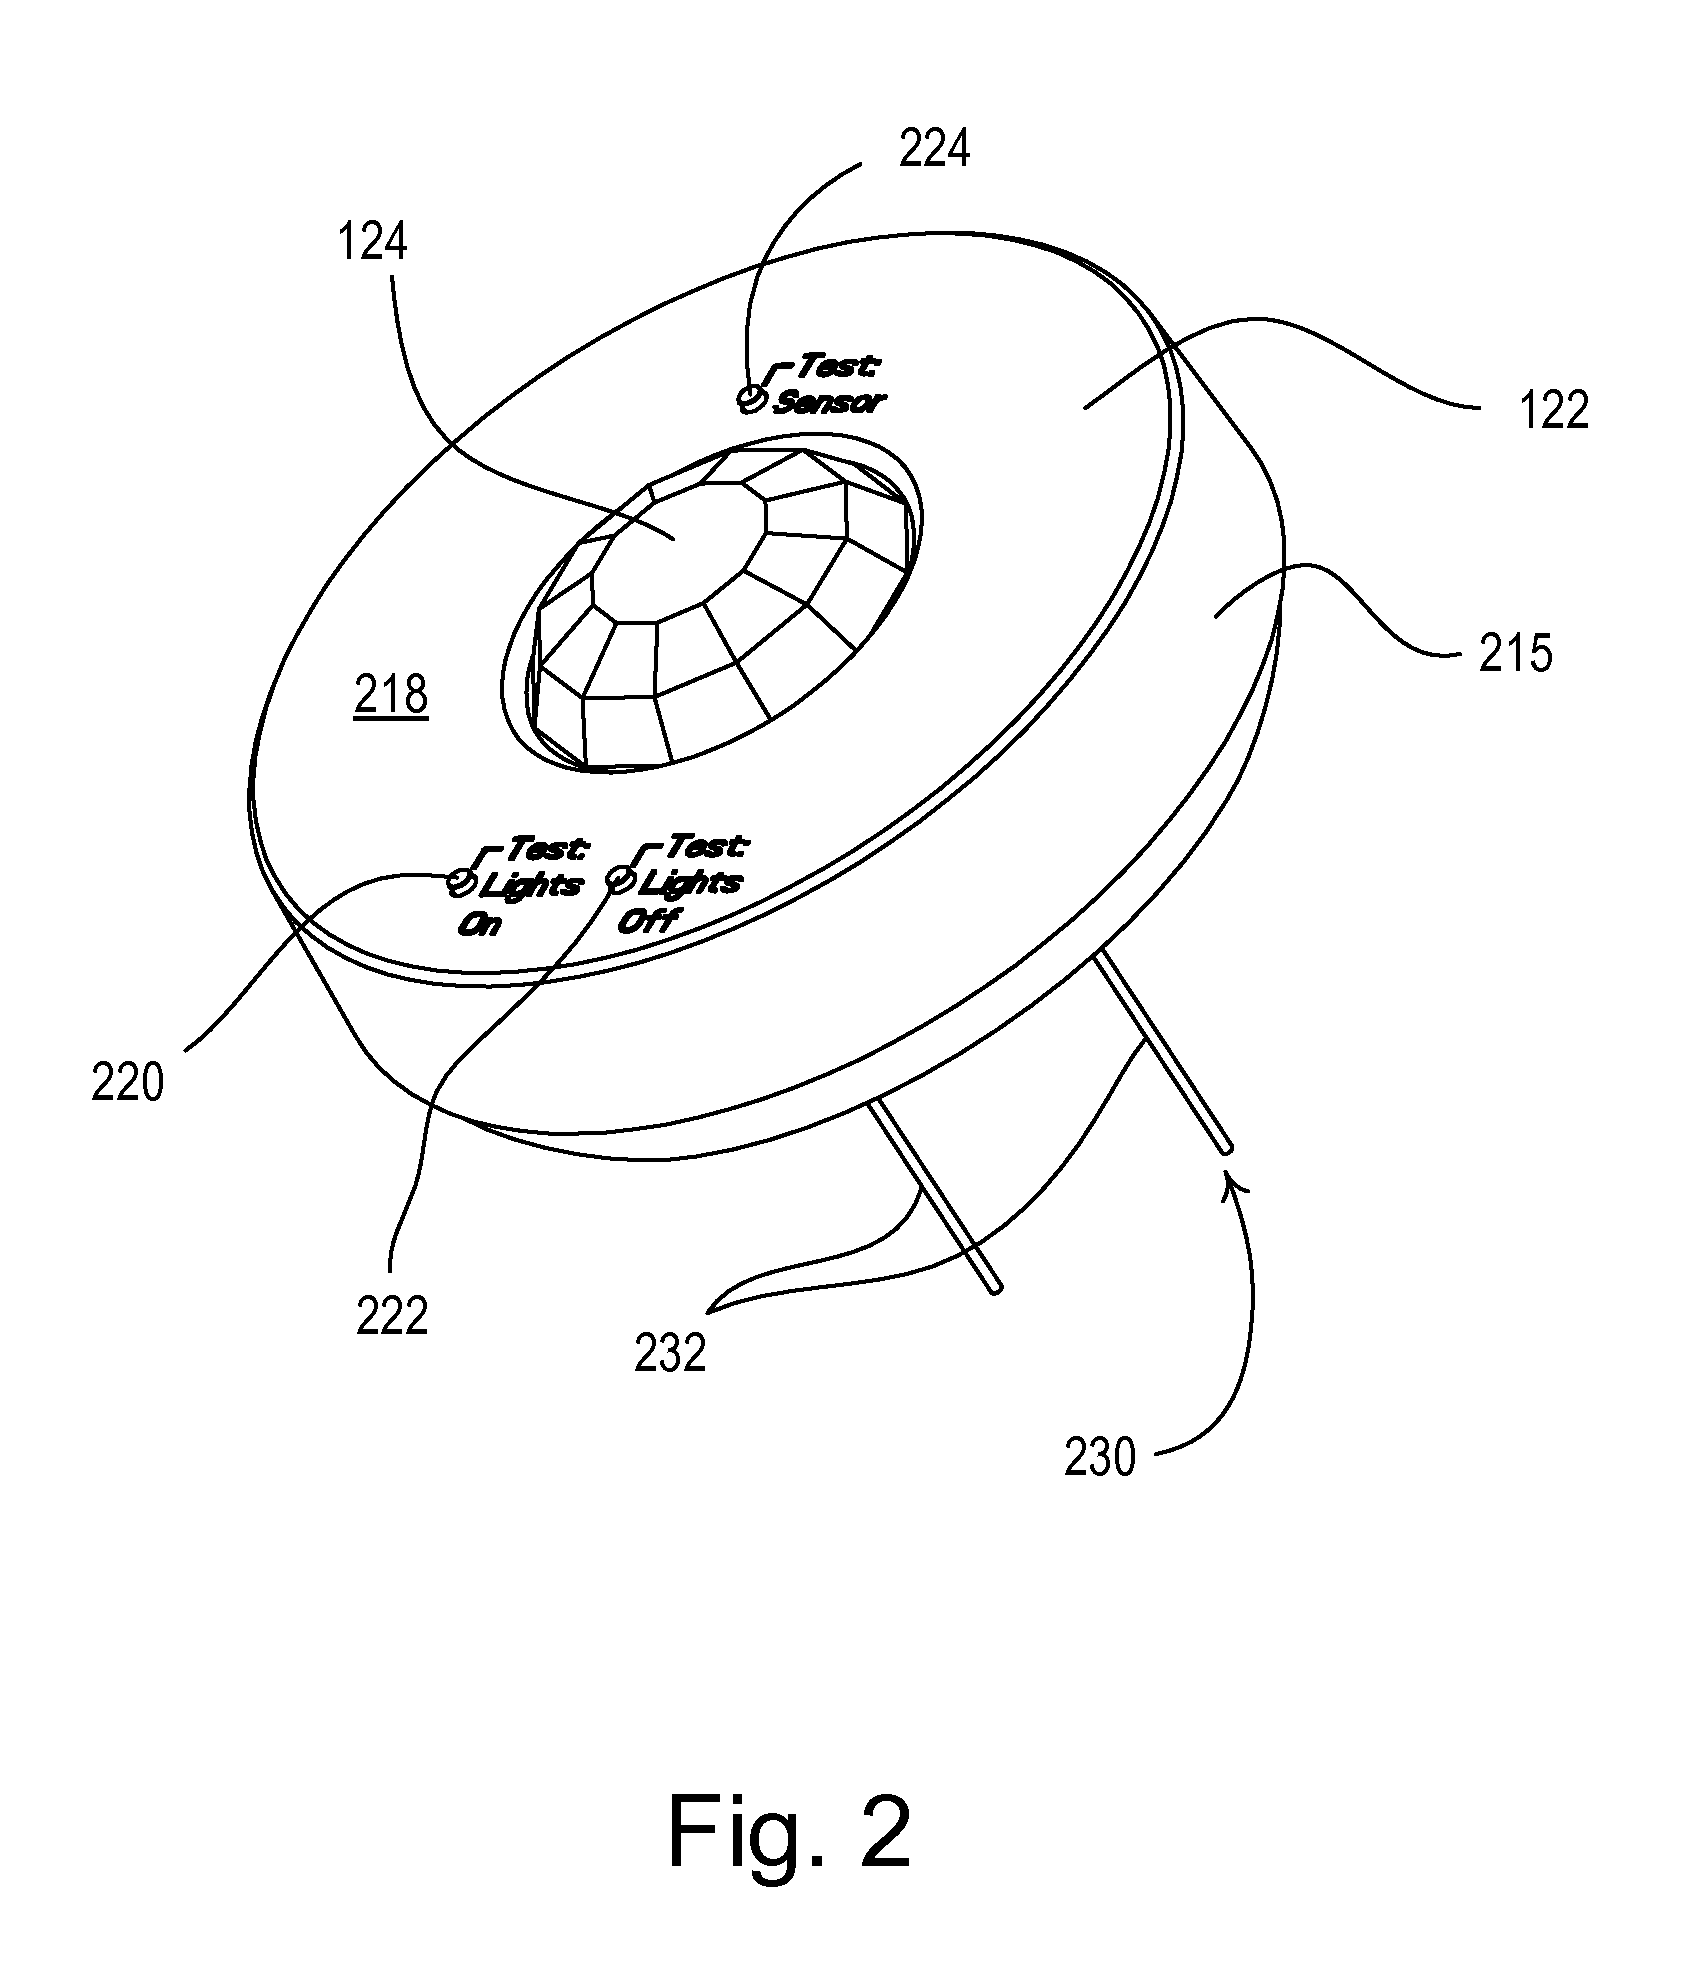 Method and Apparatus for Configuring a Wireless Sensor